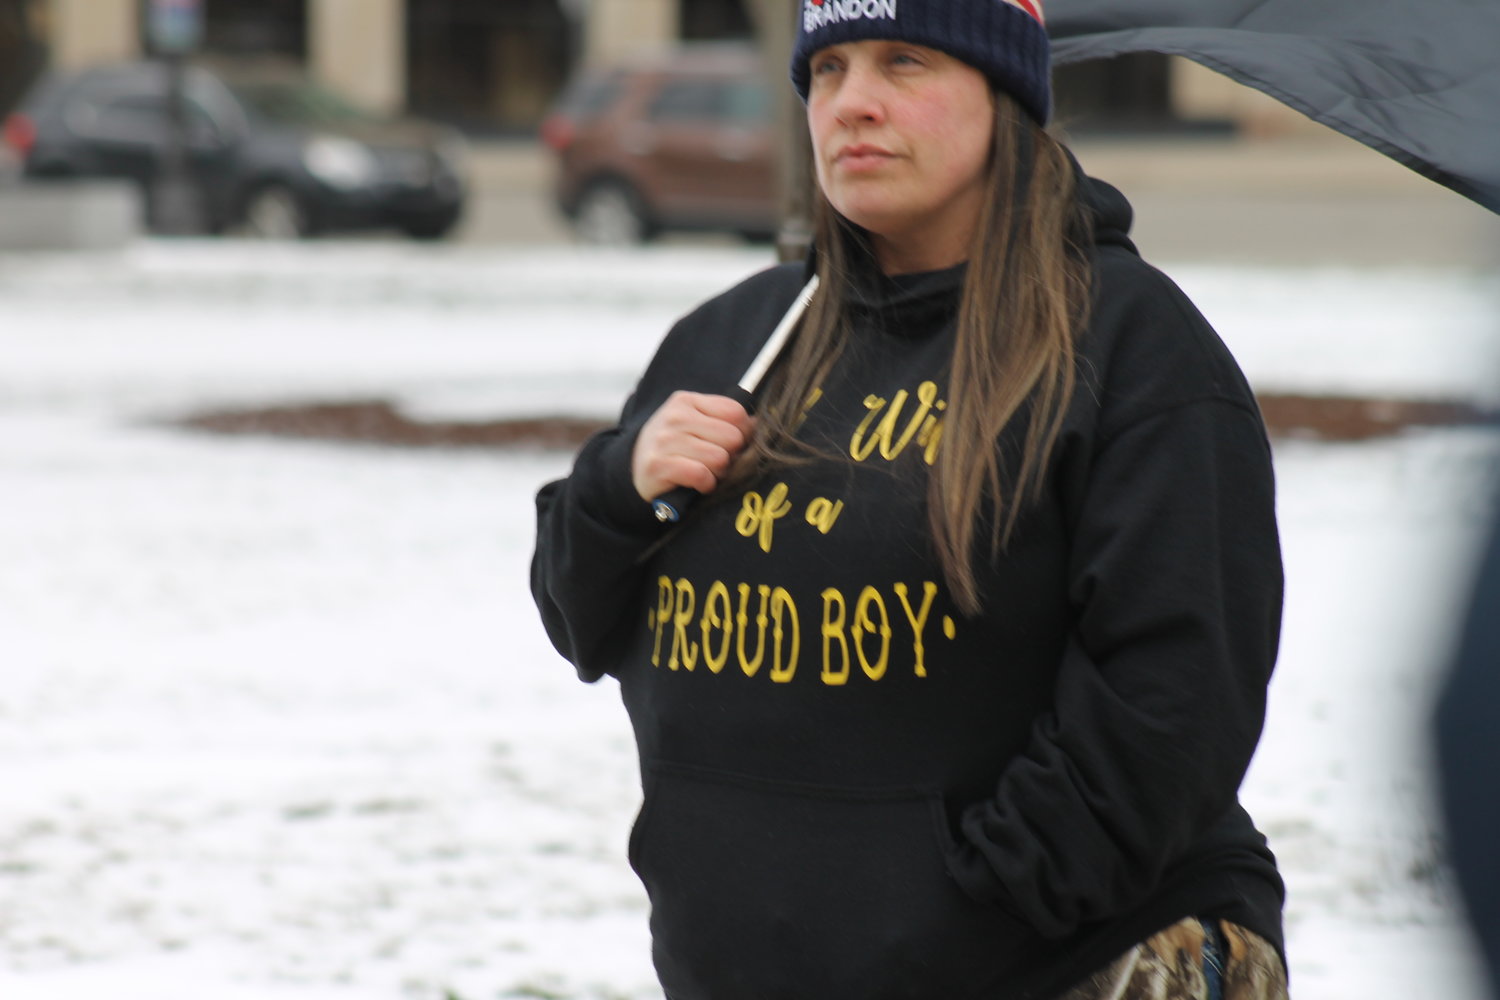 A woman at the rally is a proud wife of a member of the Western Chauvinist group Proud Boys. Some members of the organization have been charged with conspiracy for their roles in the Jan. 6 2021 insurrectionist Capitol riots.